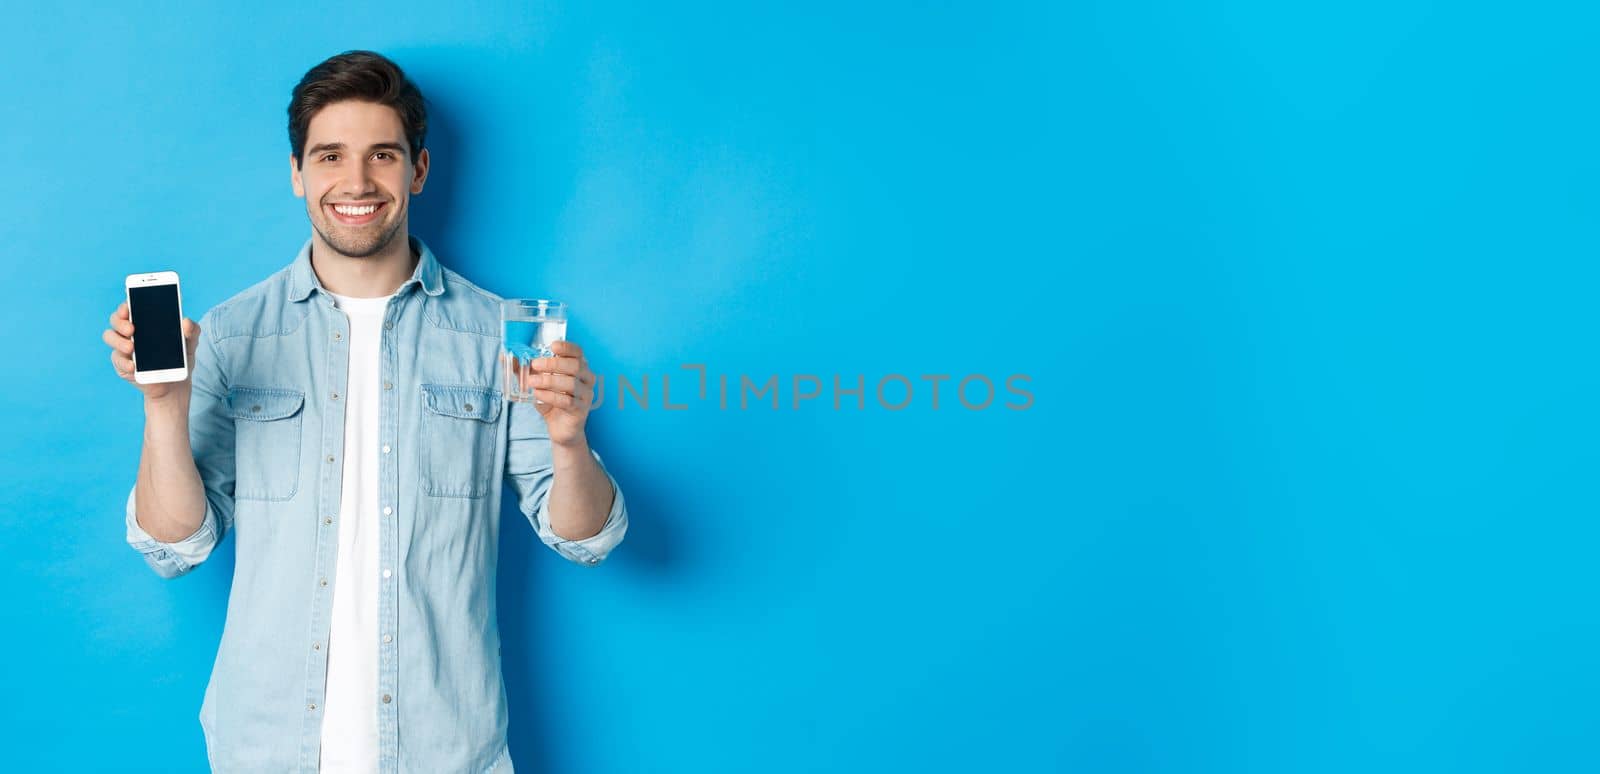 Young man control water balance with smartphone app, showing mobile screen app and smiling, standing over blue background.